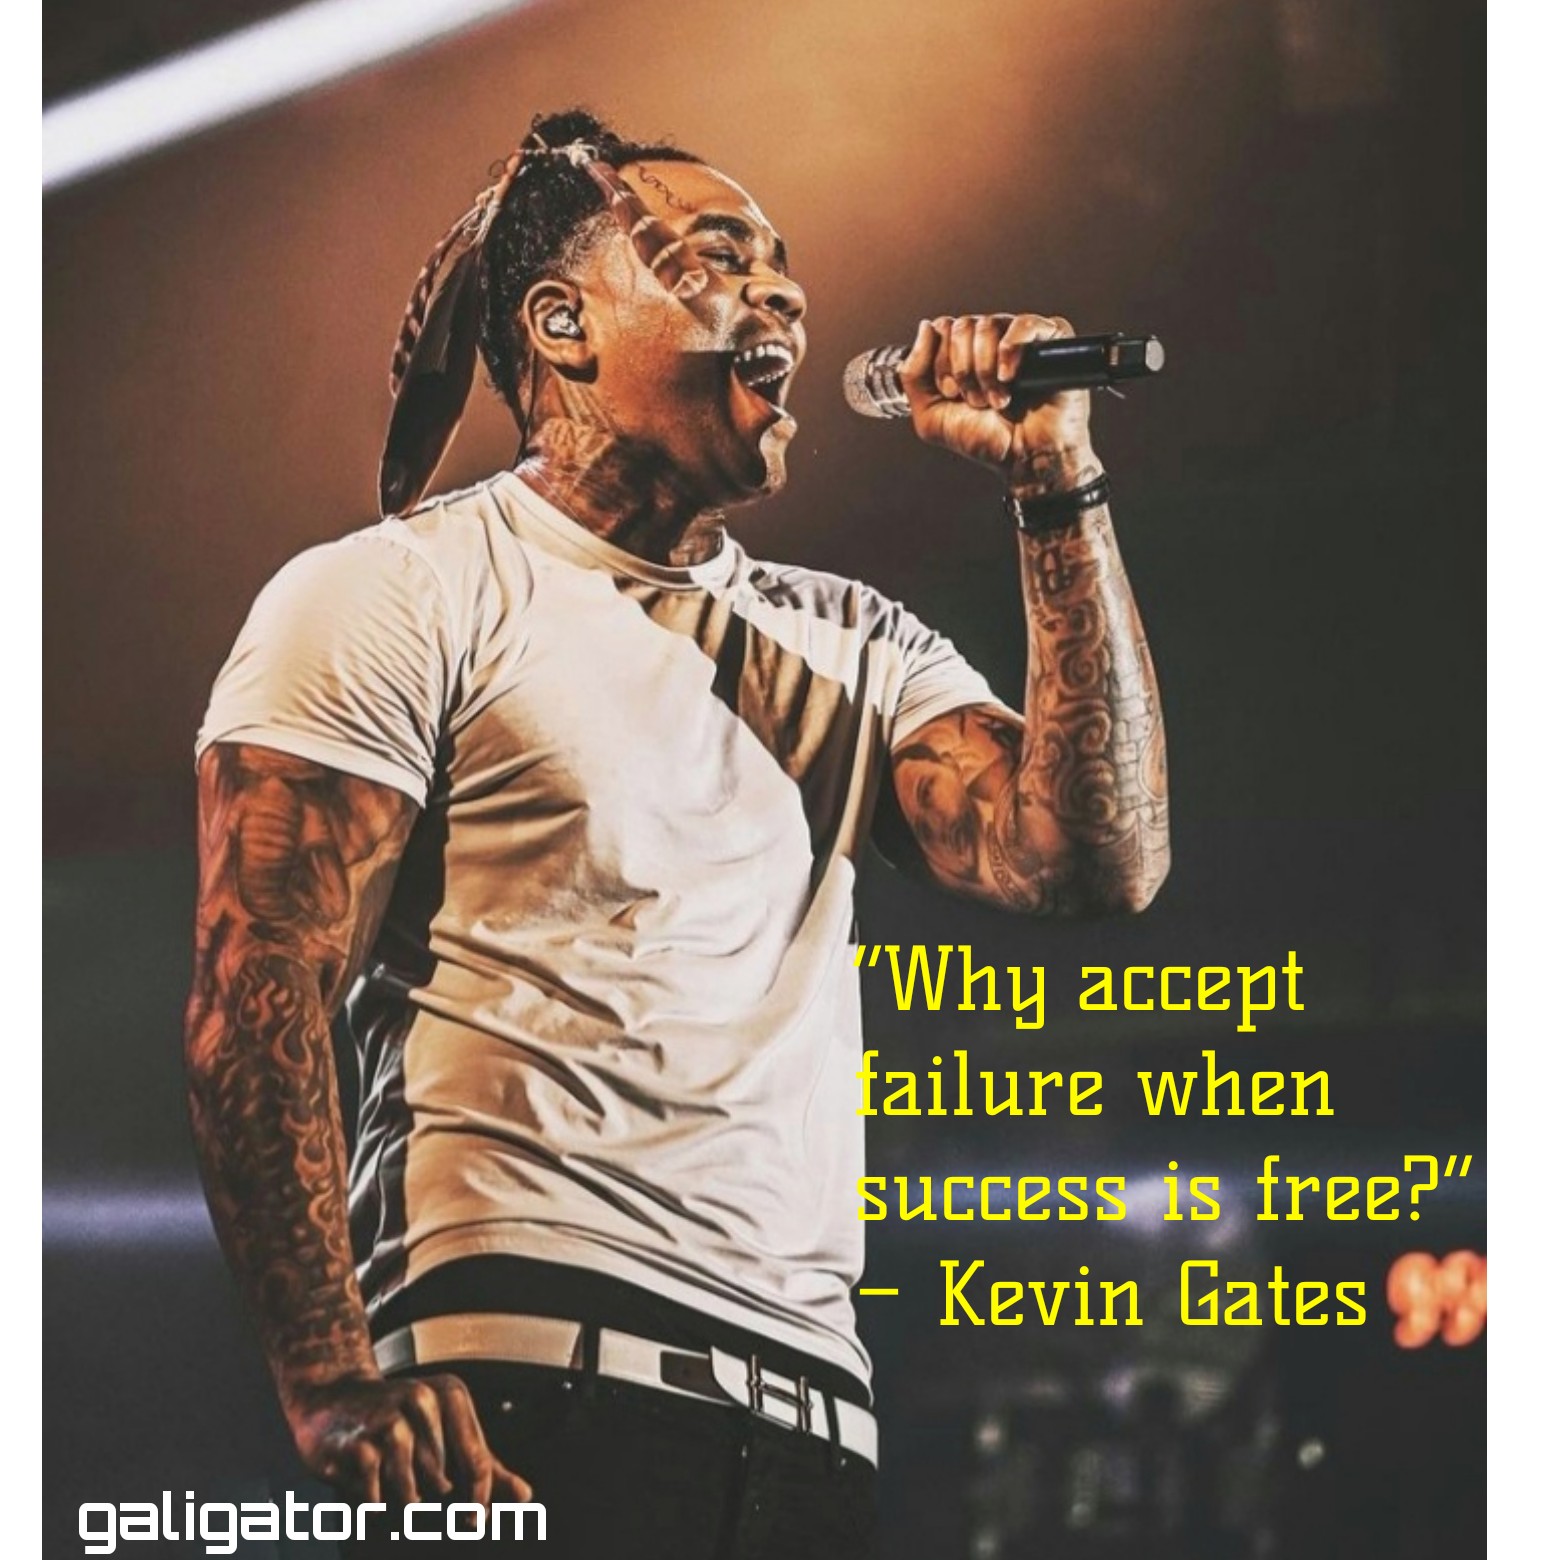 kevin gates inspirational quotes , best kevin gates quotes, kevin gates song quotes, kevin gates motivational quotes, kevin gates relationship quotes, kevin gates quotes about loyalty , kevin gates quotes about life, kevin gates love quotes , kevin gates quotes about love, kevin gates quotes , kevin gates motivational quotes,  kevin gates inspirational quotes , quotes kevin gates, best kevin gates quotes , kevin gates famous quotes , kevin gates quotes about life, kevin gates sayings, kevin gates captions , kevin gates quotes about love ,